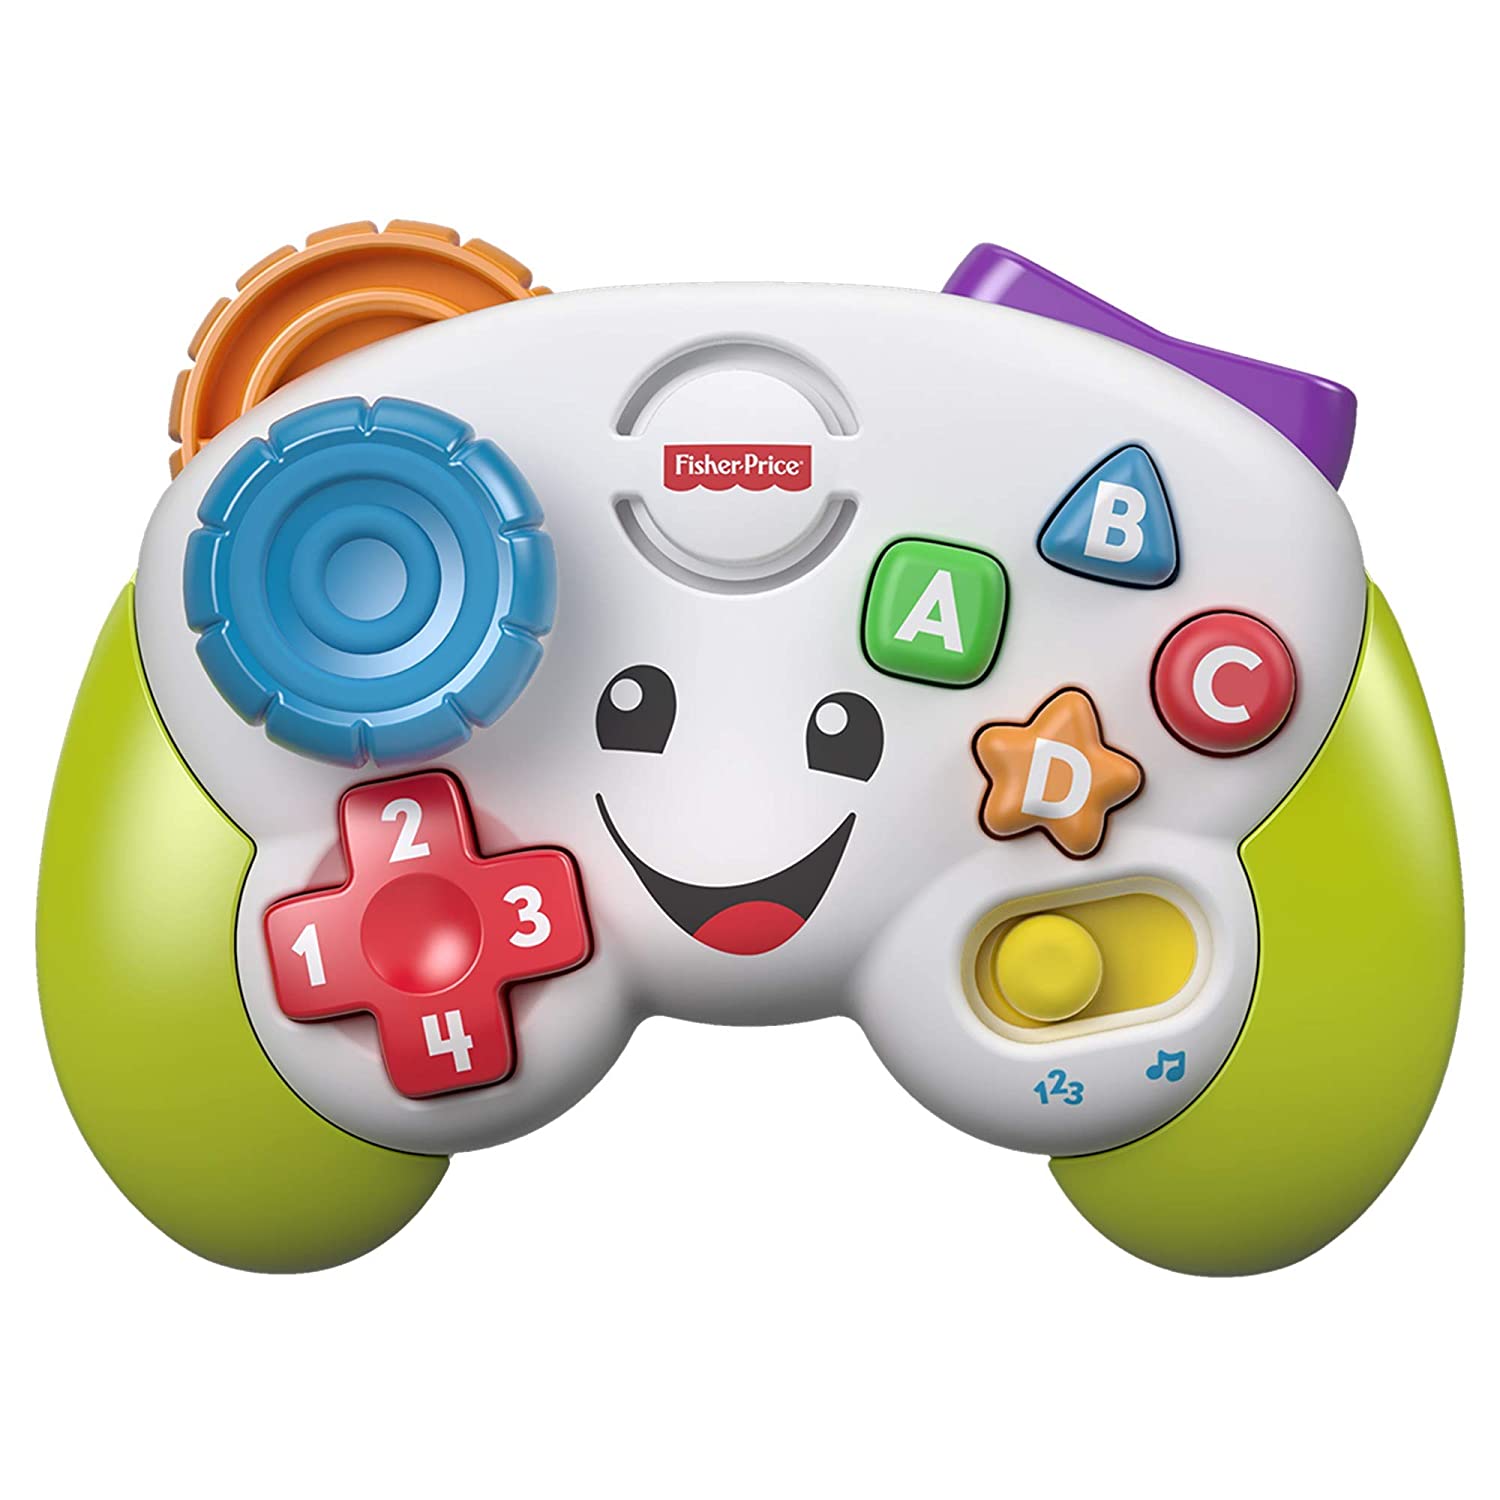 Fisher-Price Fwg14 Learning Fun, Game Controller, Learning Toy For Letters 